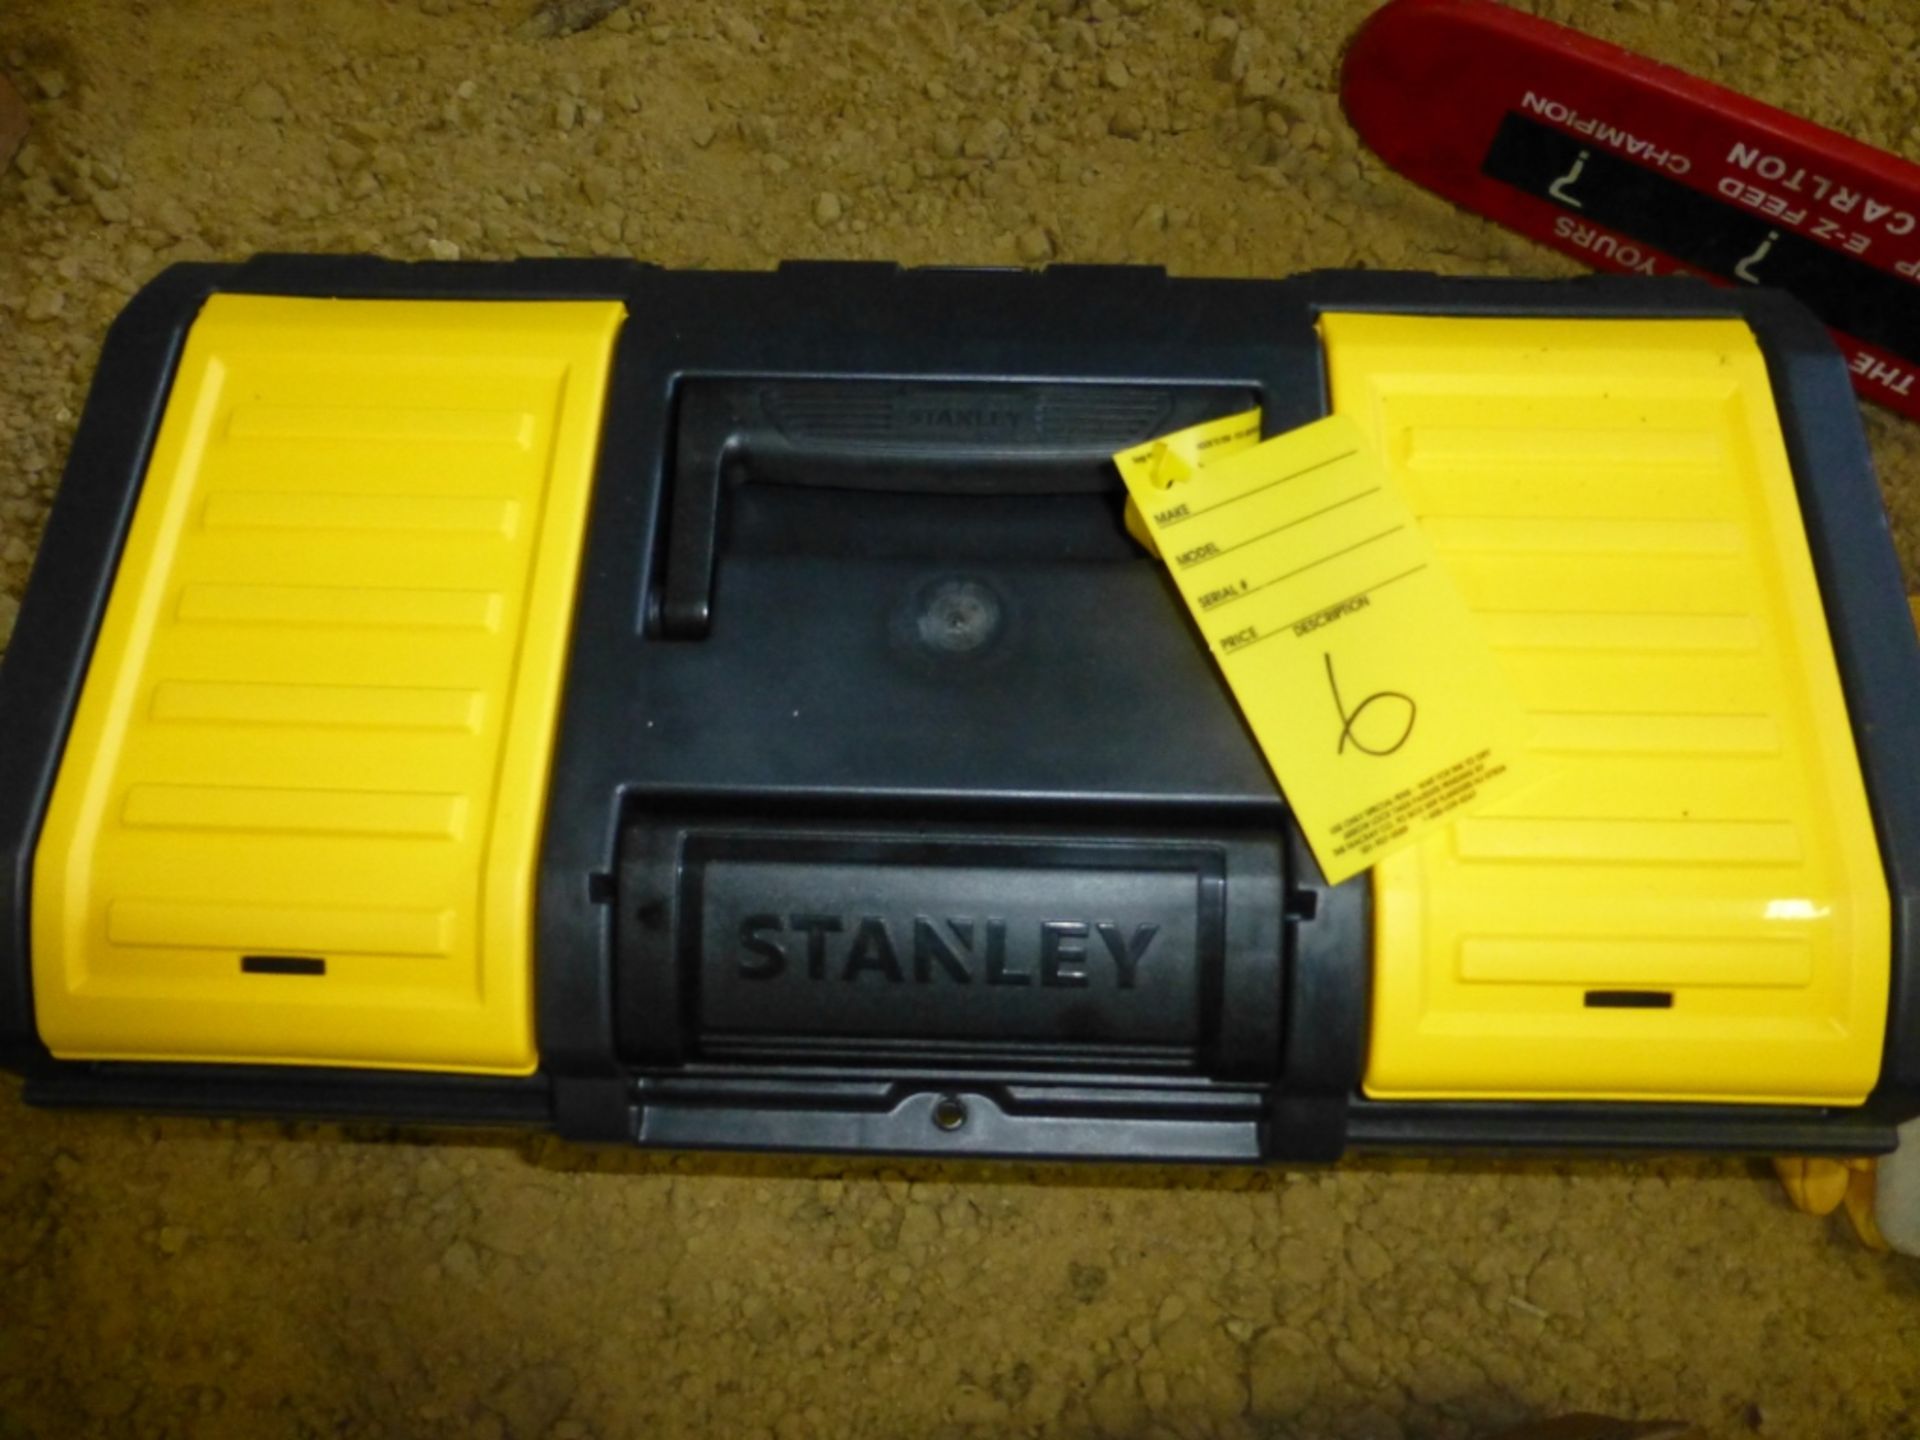 Stanley tool box, with contents